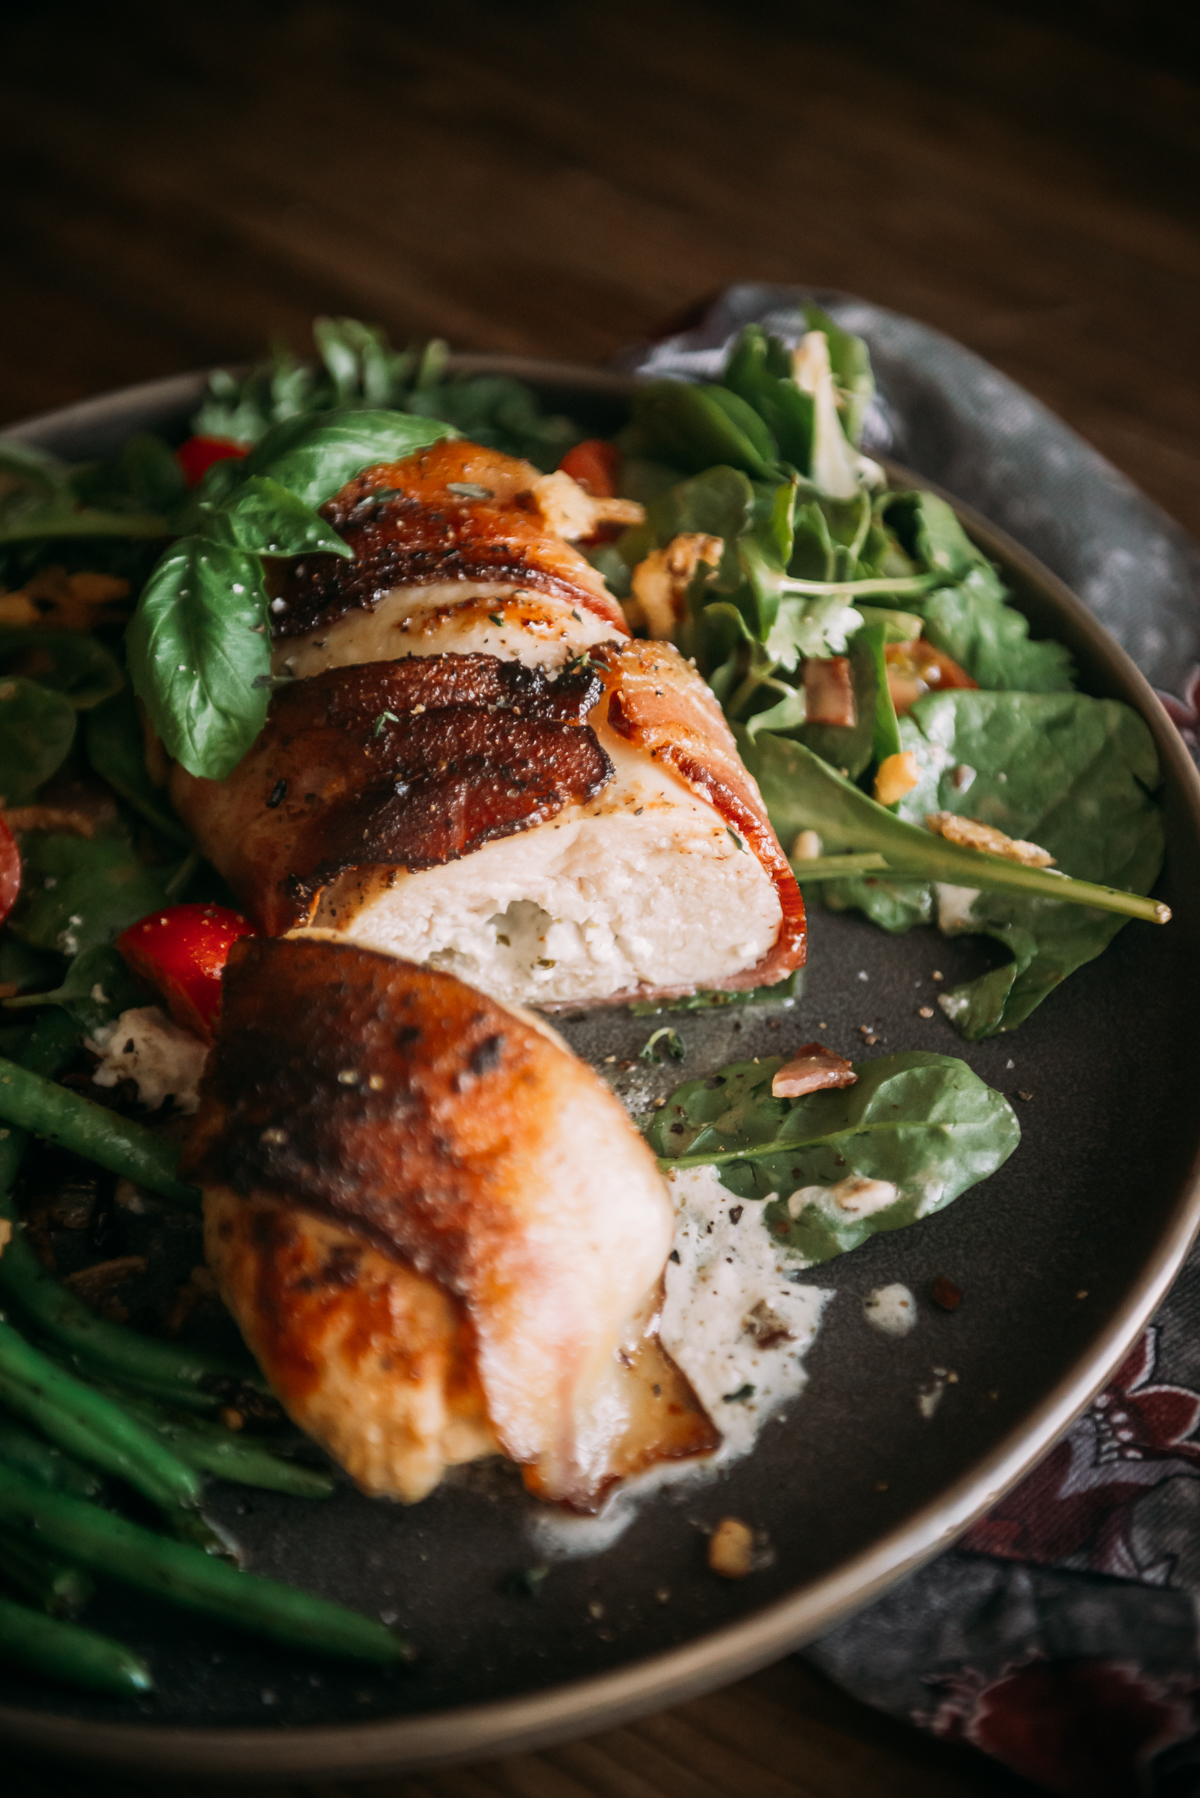 Bacon wrapped stuffed chicken breast with salad greens.